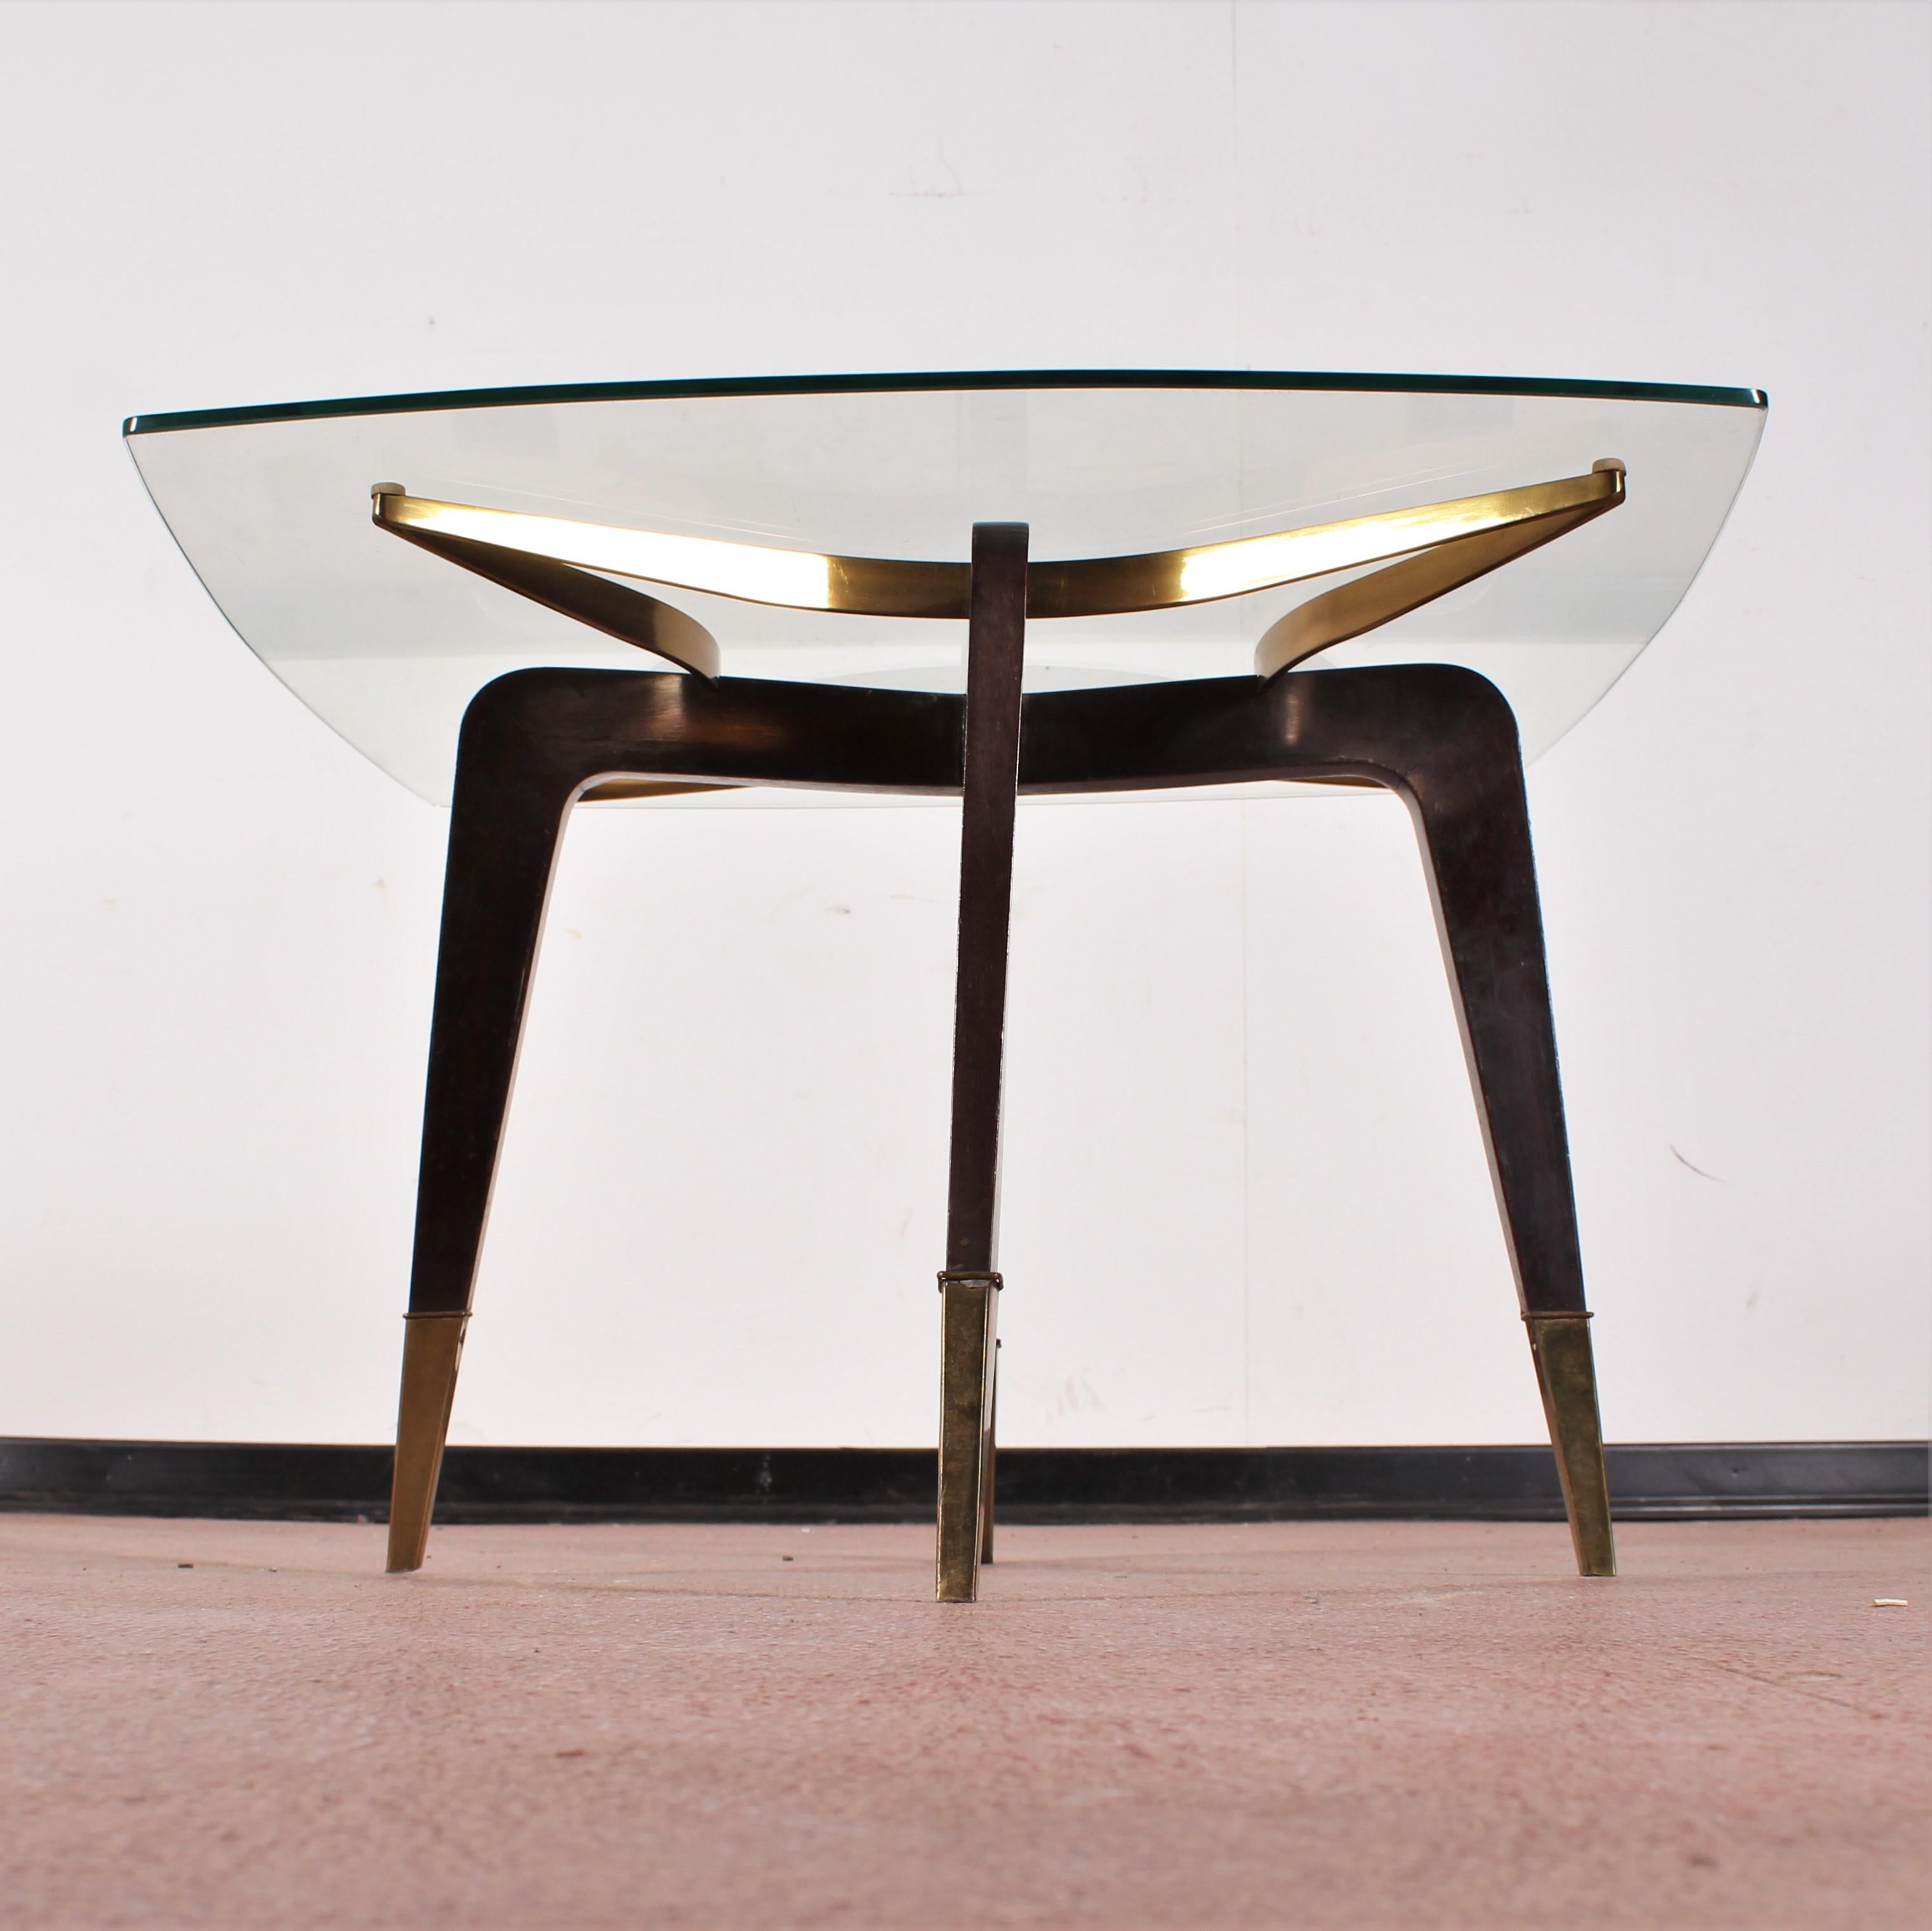 Italian O. Borsani Midcentury Brass and Wood Square Coffee Table Glass Top, Italy, 1950s